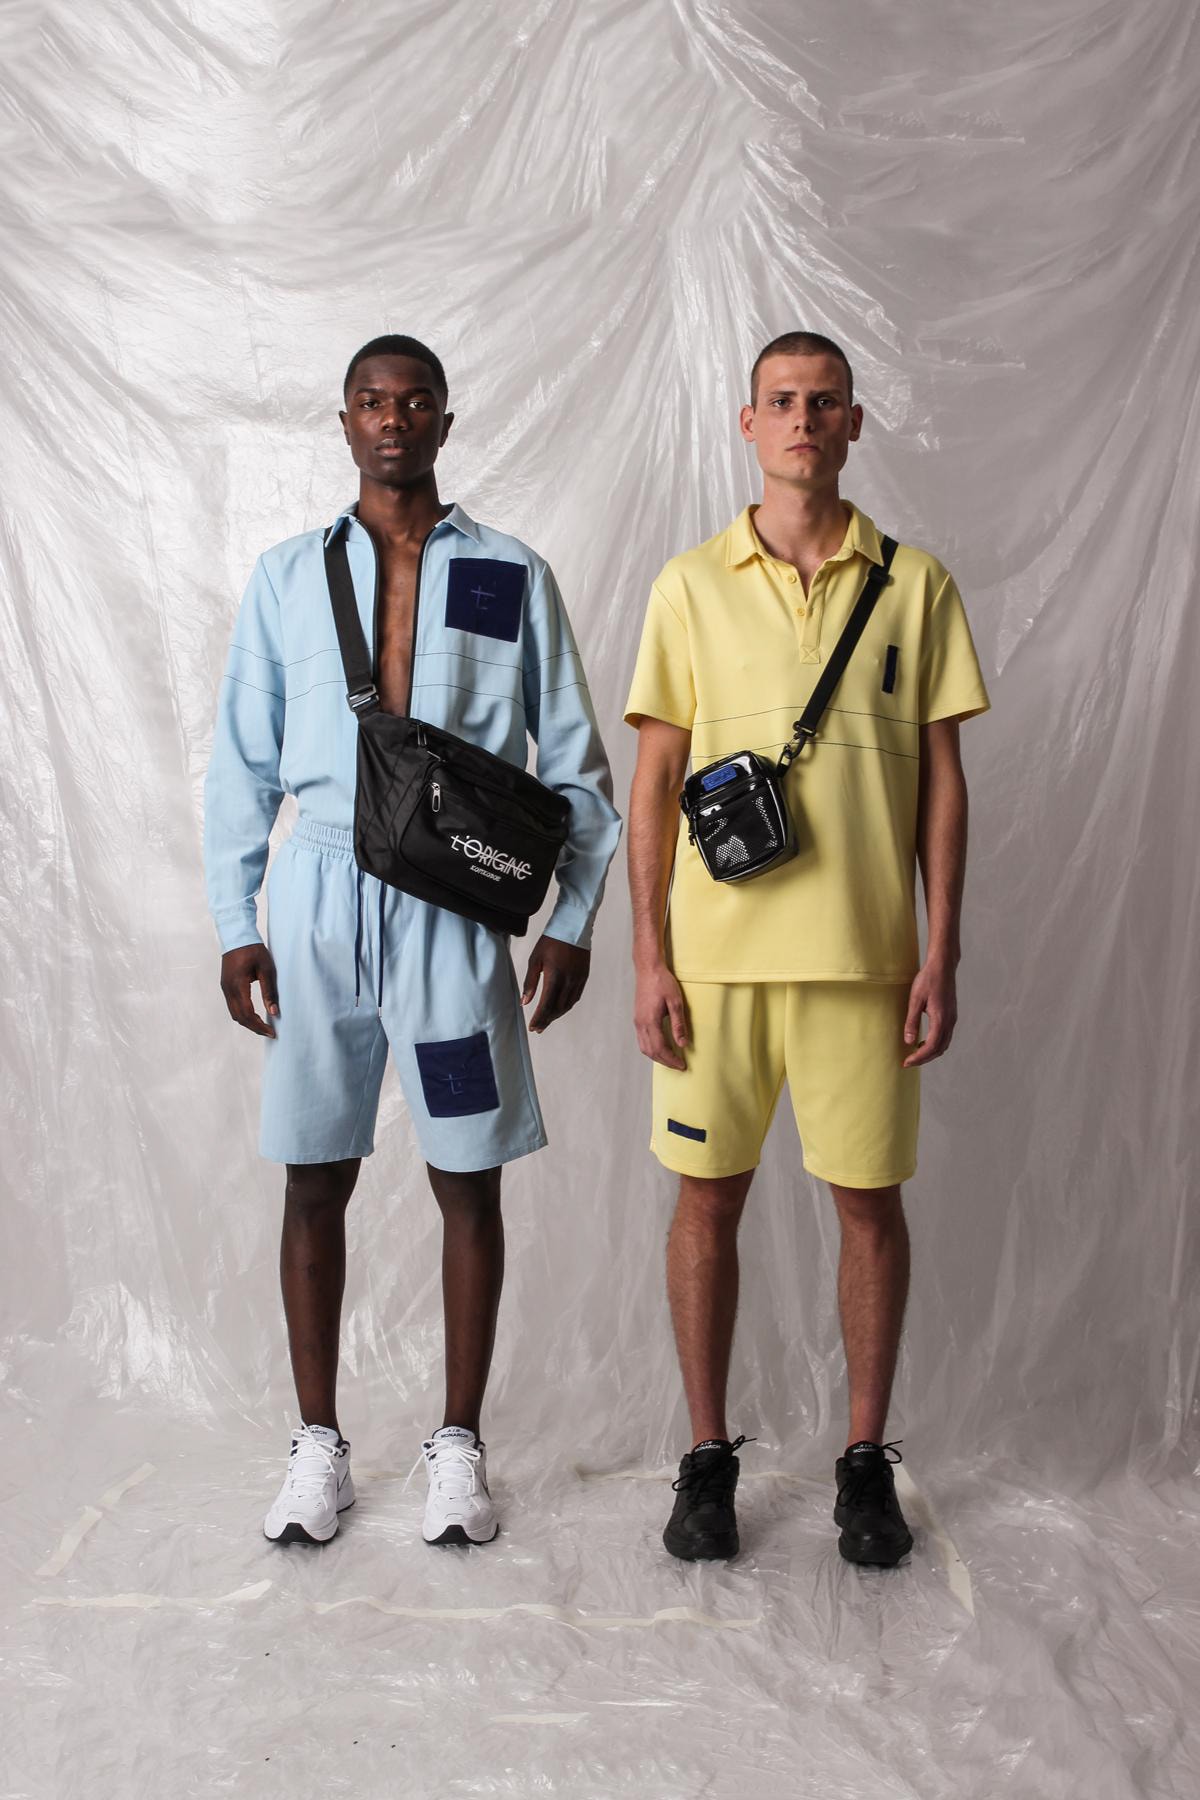 High Fashion and Streetwear: Opposites attract each other - The